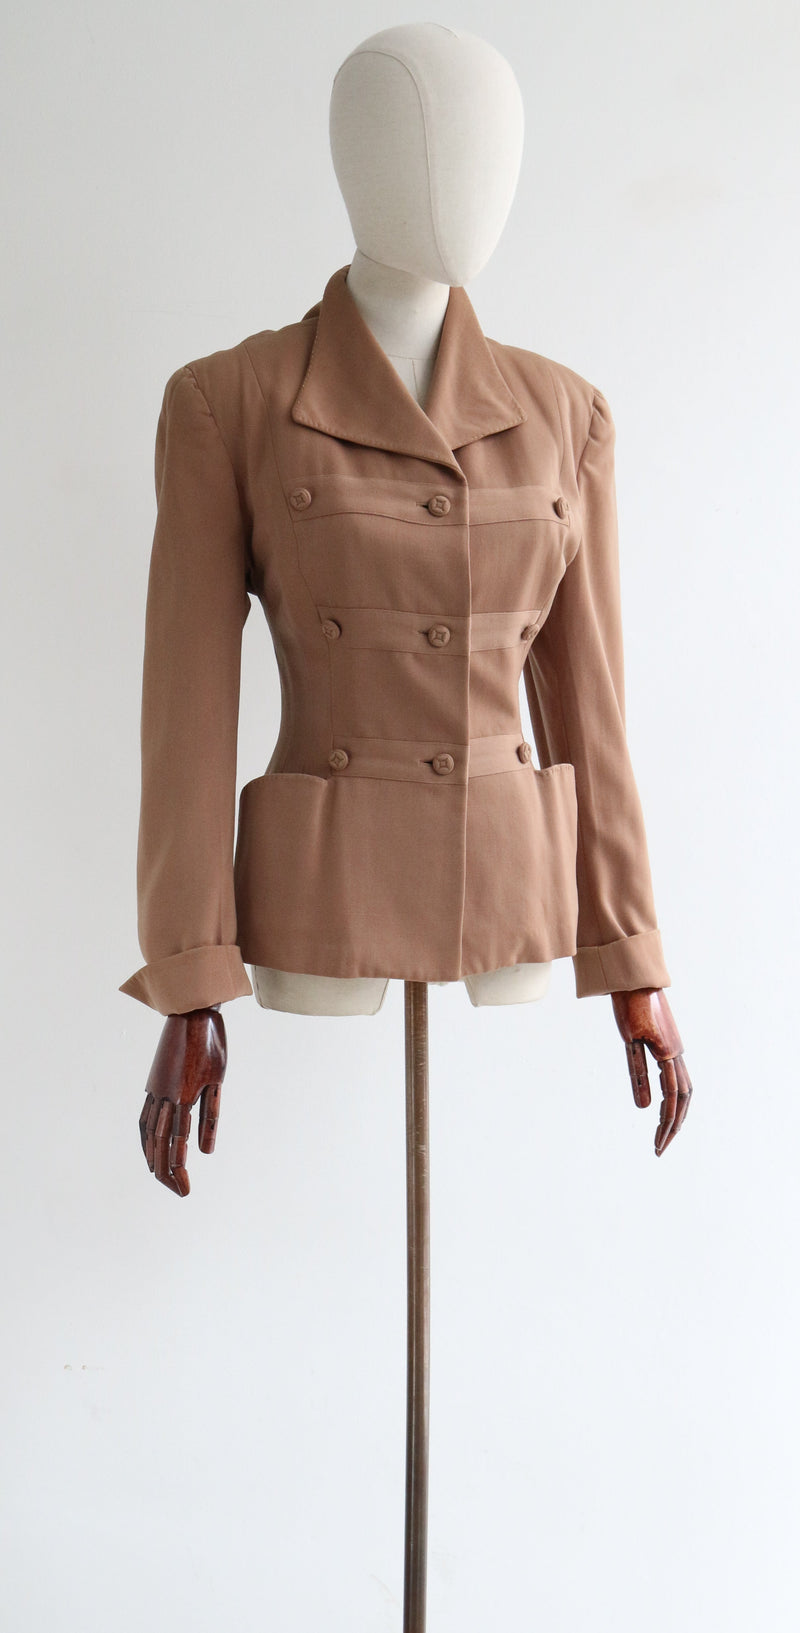 "Fawn Finishes" Vintage 1940's Fawn & Caramel Fitted Jacket UK 12 US 8